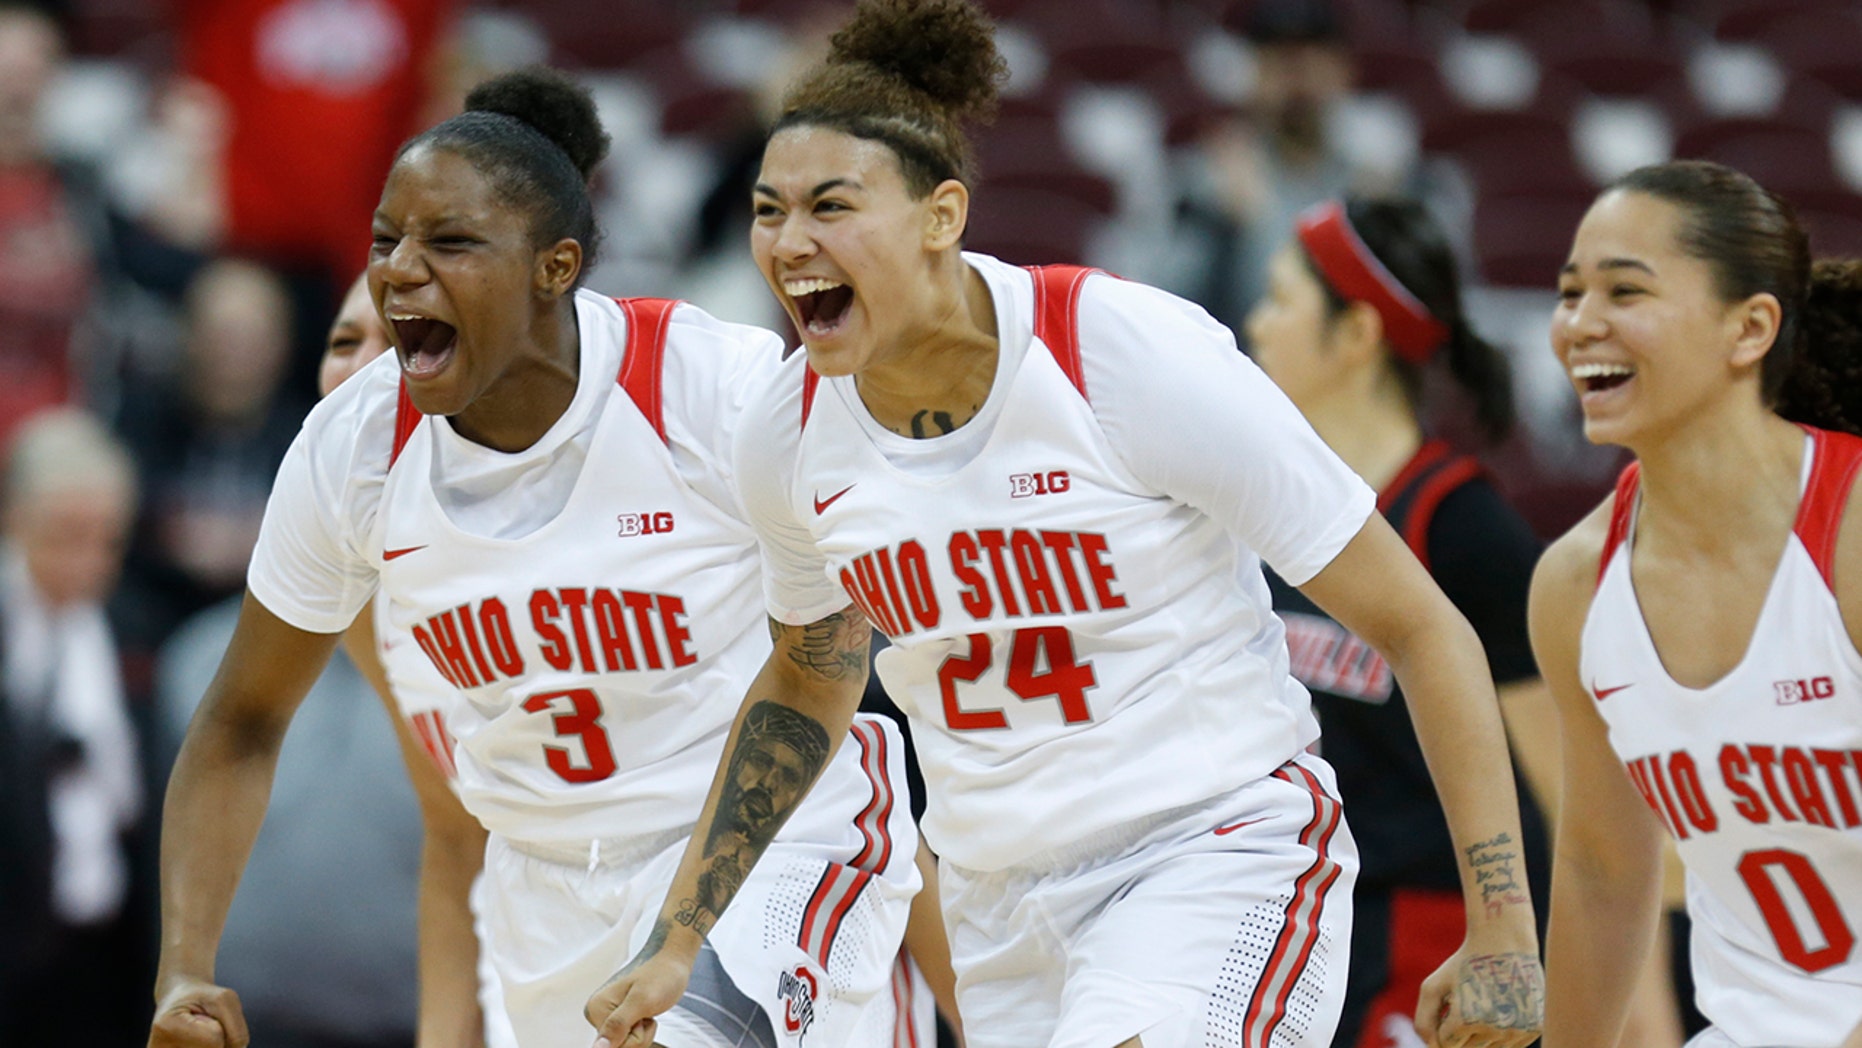 Ohio State guard Janai Crooms, left, guard Kierstan Bell and guard Madison Greene celebrate the team's win over Louisville in an NCAA college basketball game in Columbus, Ohio, Thursday, Dec. 5, 2019. (AP Photo/Paul Vernon)